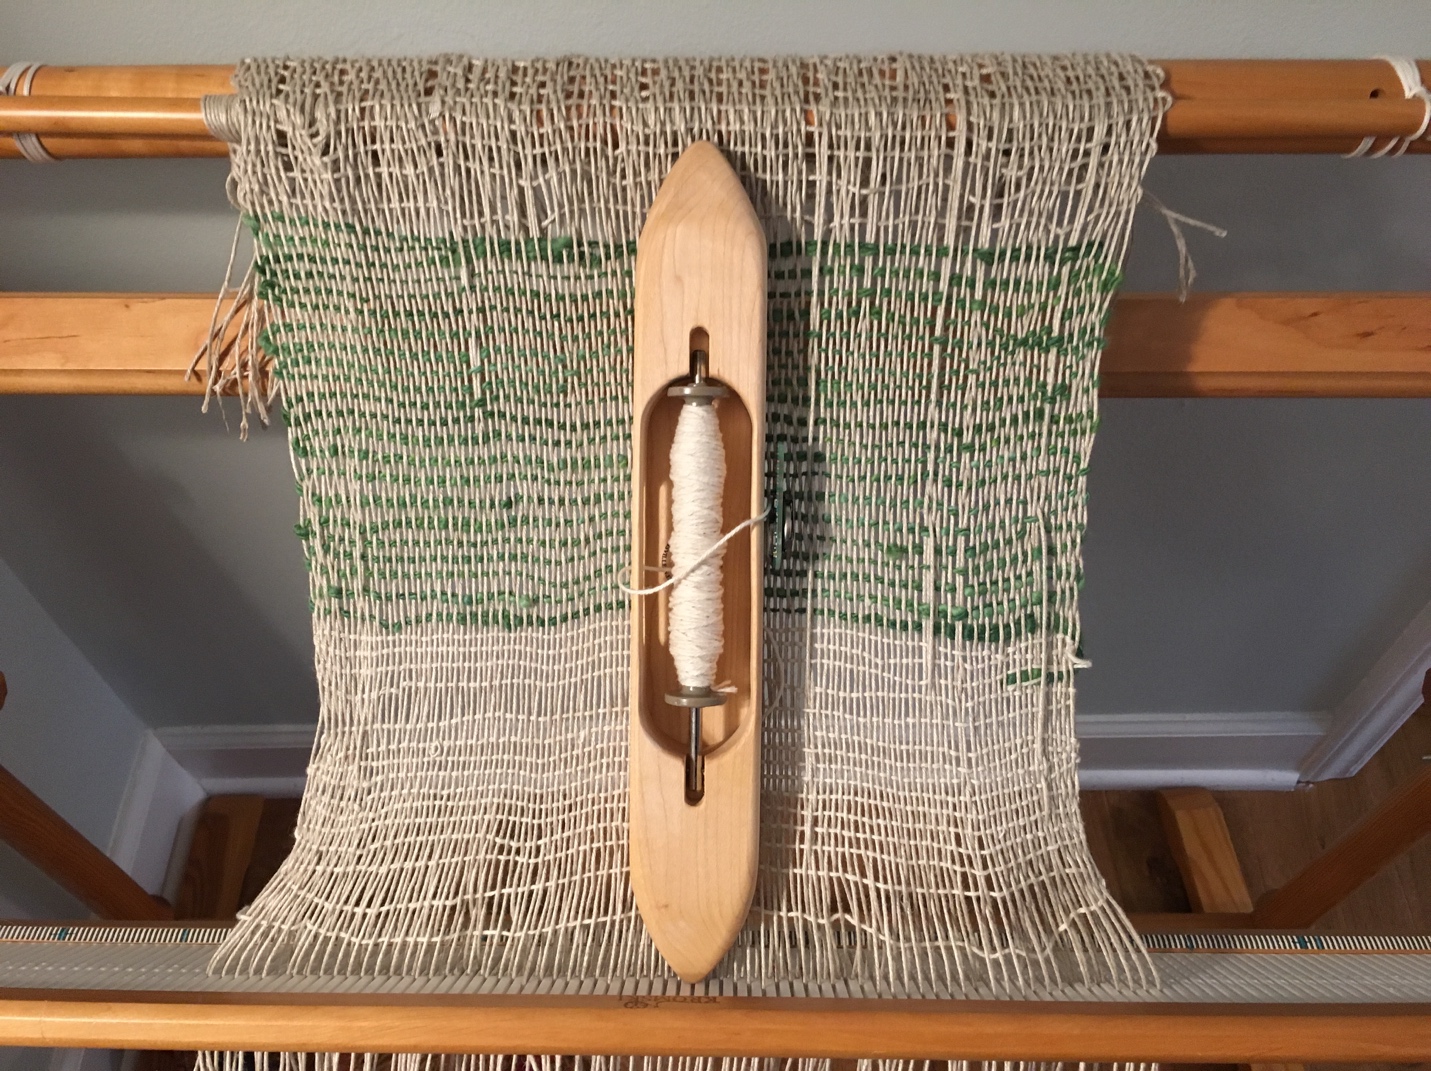 Lachesis. Boat shuttle, rigid heddle loom, and textile.